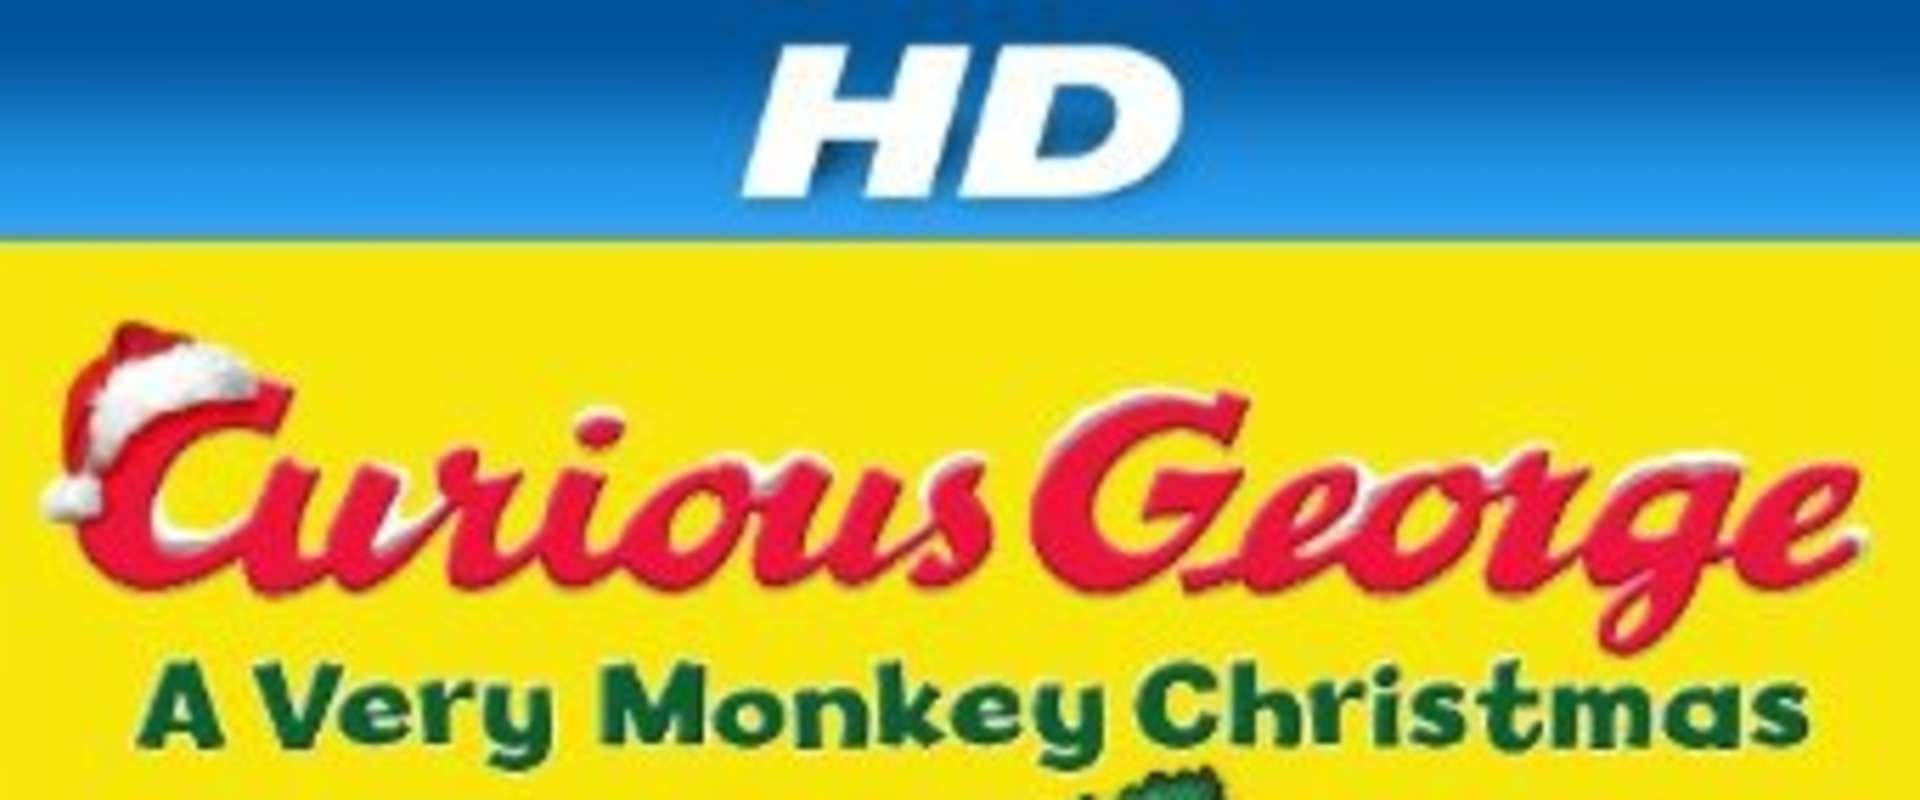 Curious George: A Very Monkey Christmas background 1